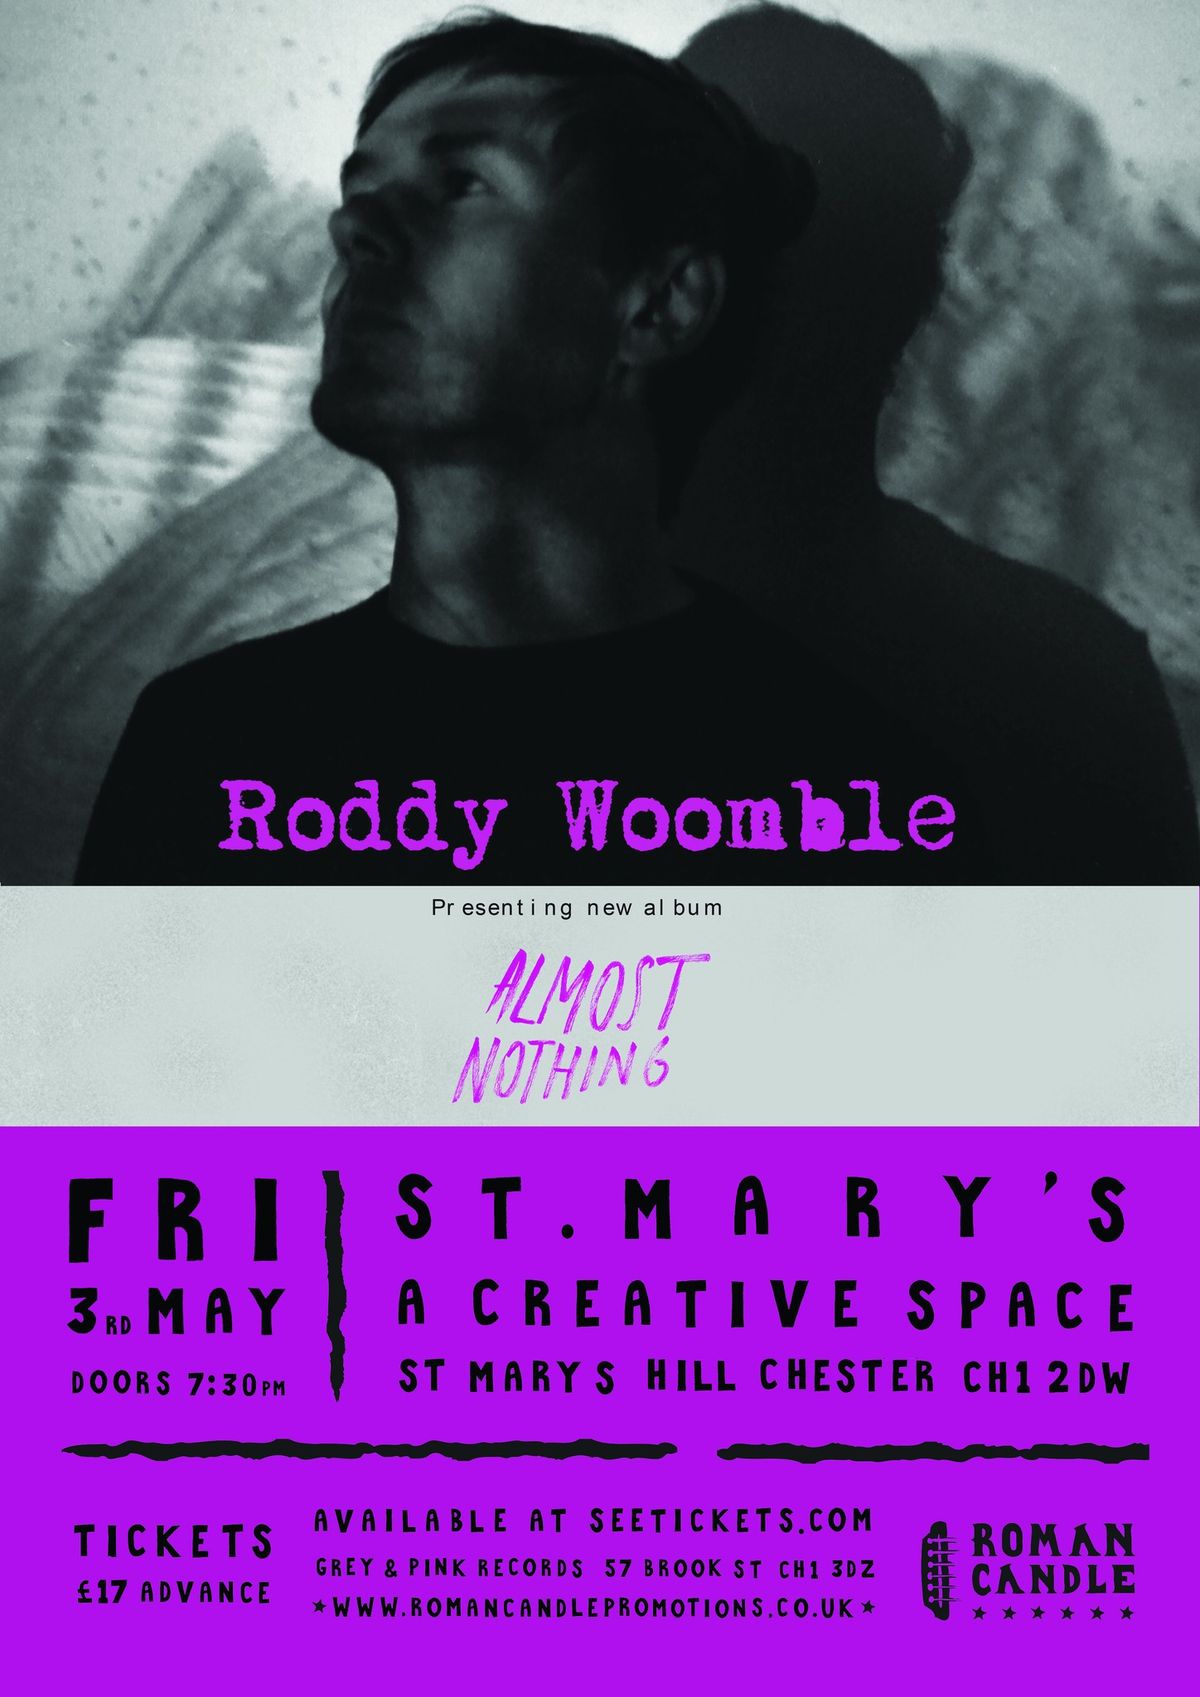 Roman Candle Presents Roddy Woomble & Almost Nothing